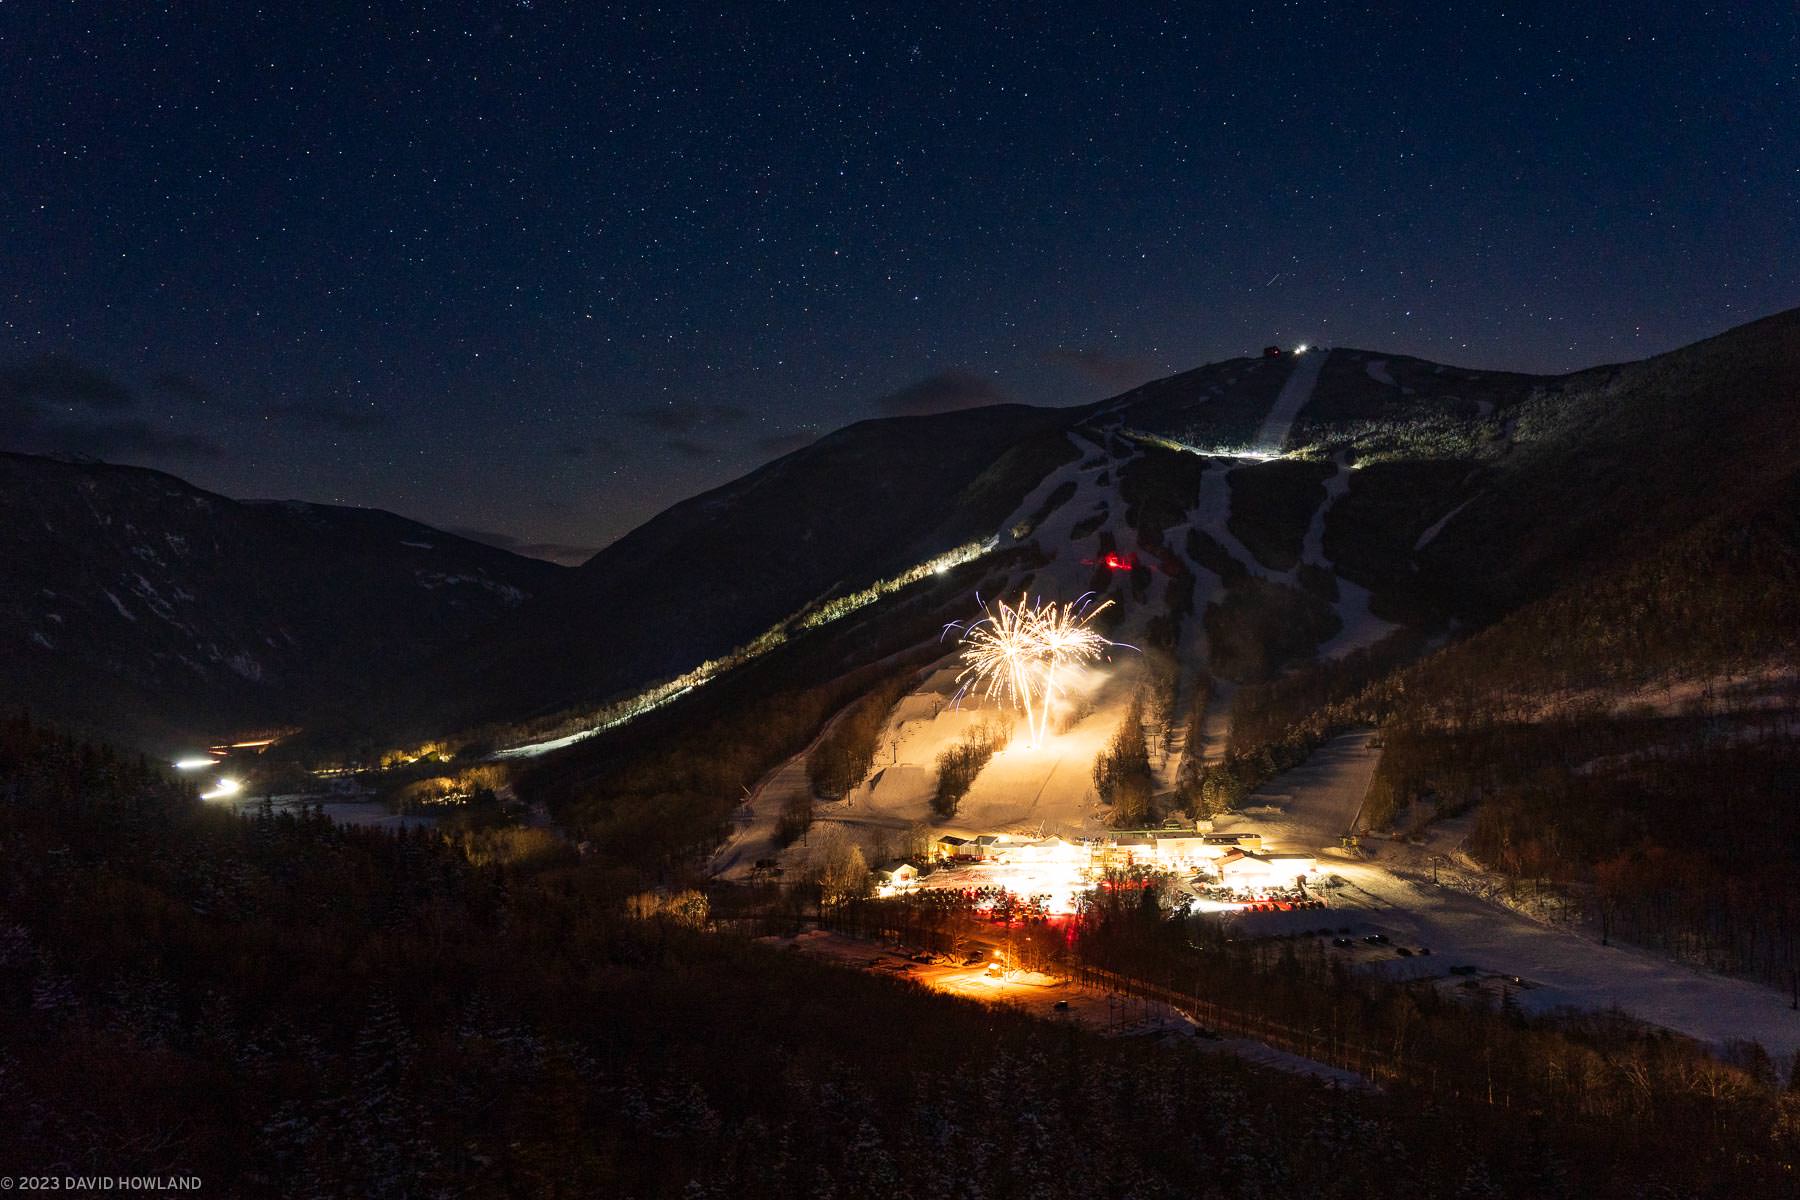 A photo of fireworks exploding over snow-covered Cannon Mountain under a clear winter sky filled with stars